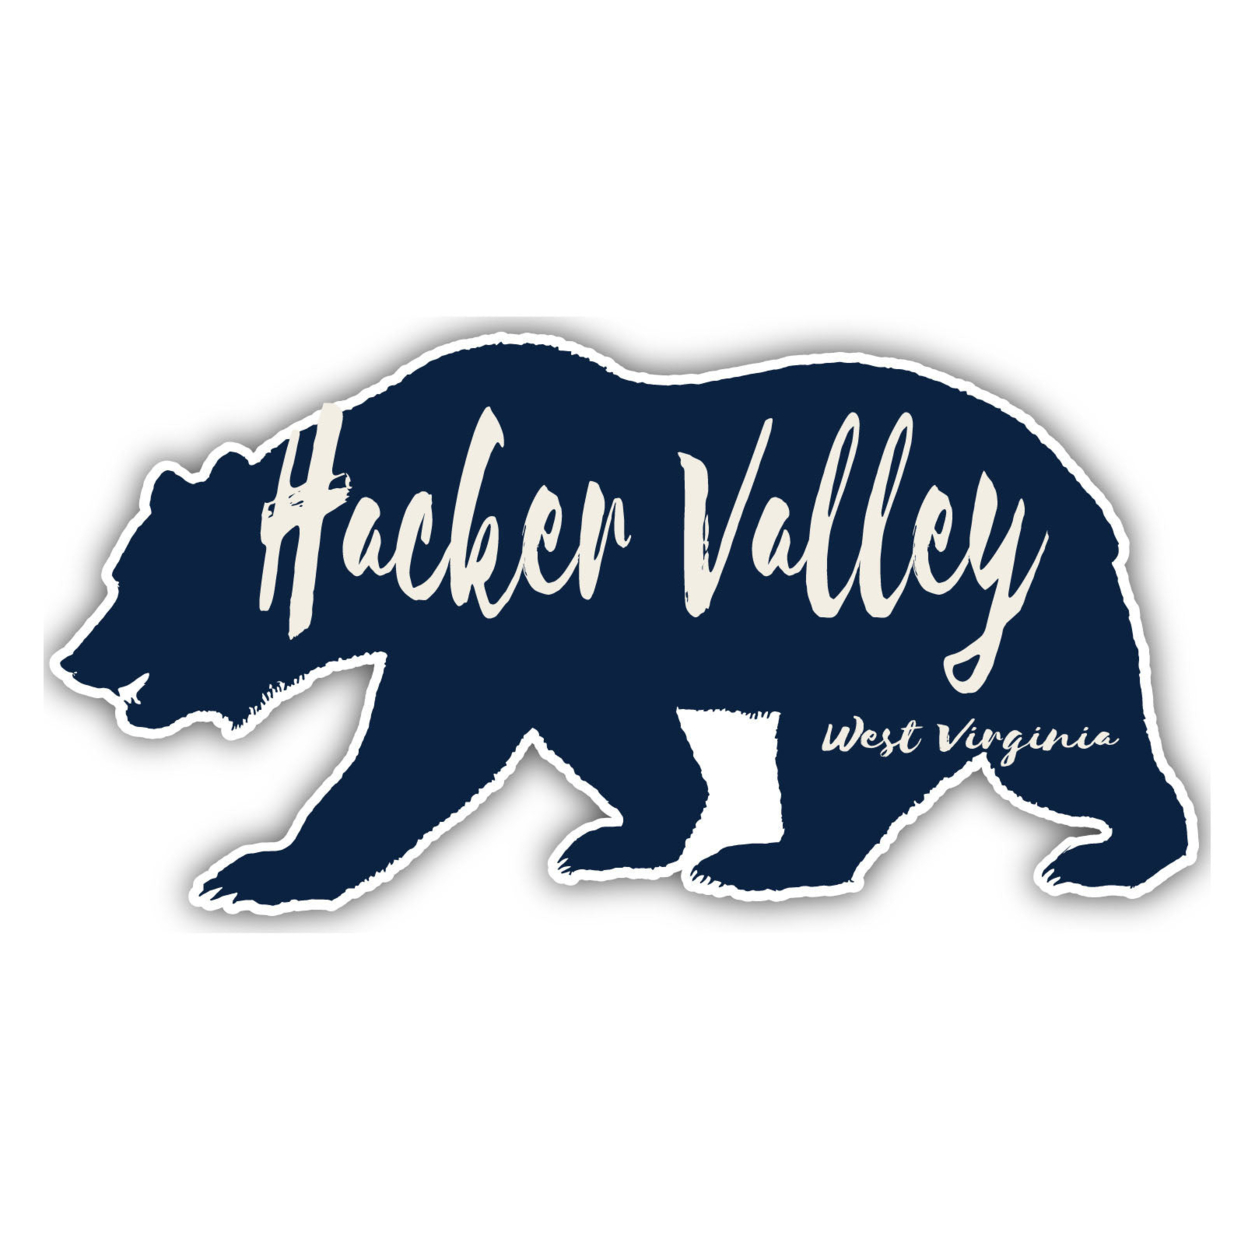 Hacker Valley West Virginia Souvenir Decorative Stickers (Choose Theme And Size) - 4-Pack, 12-Inch, Bear